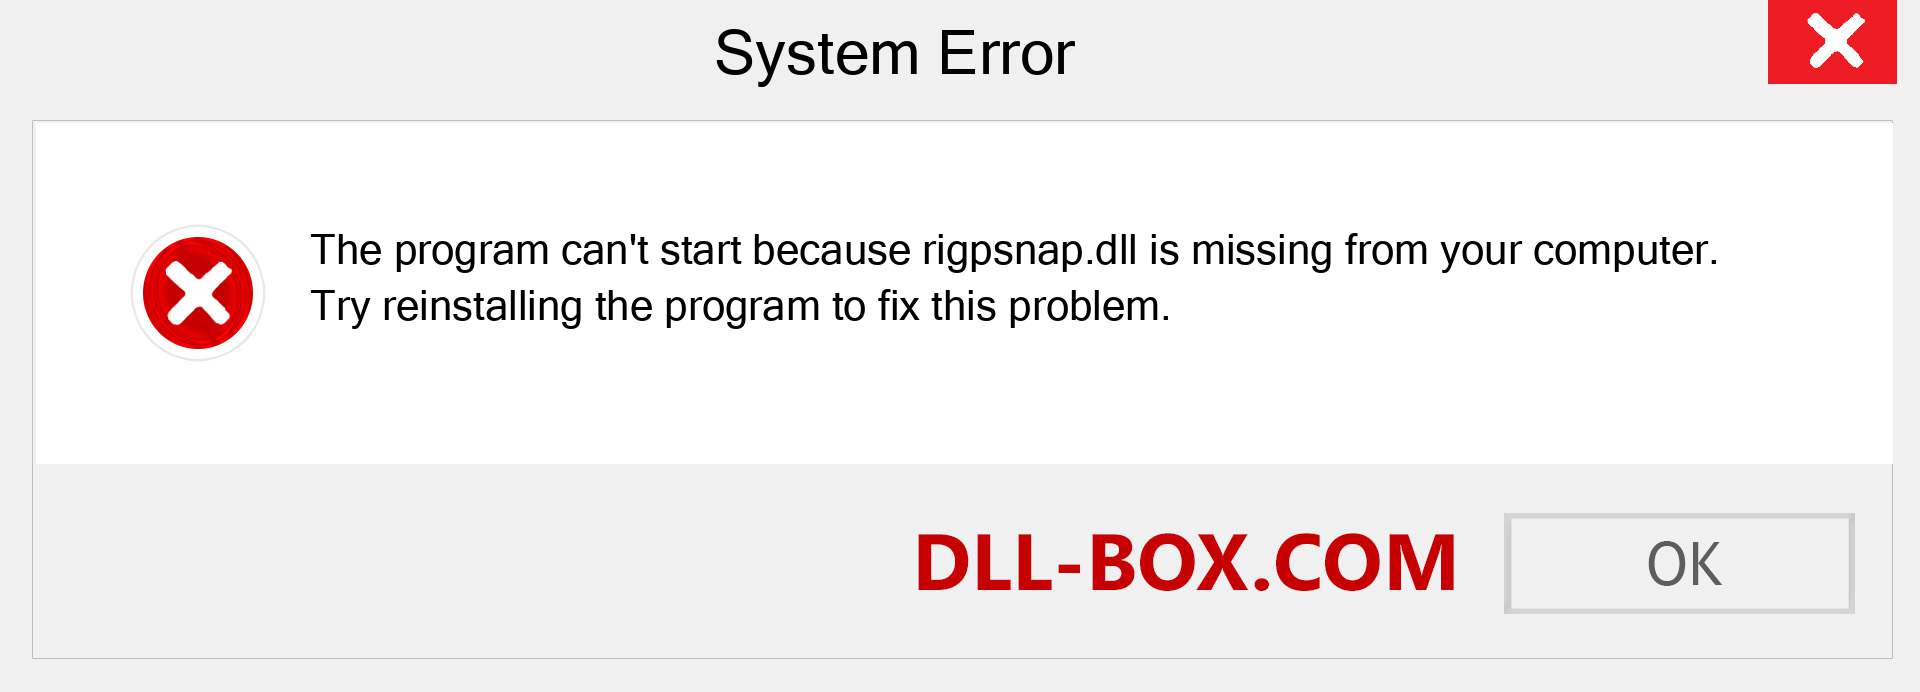  rigpsnap.dll file is missing?. Download for Windows 7, 8, 10 - Fix  rigpsnap dll Missing Error on Windows, photos, images